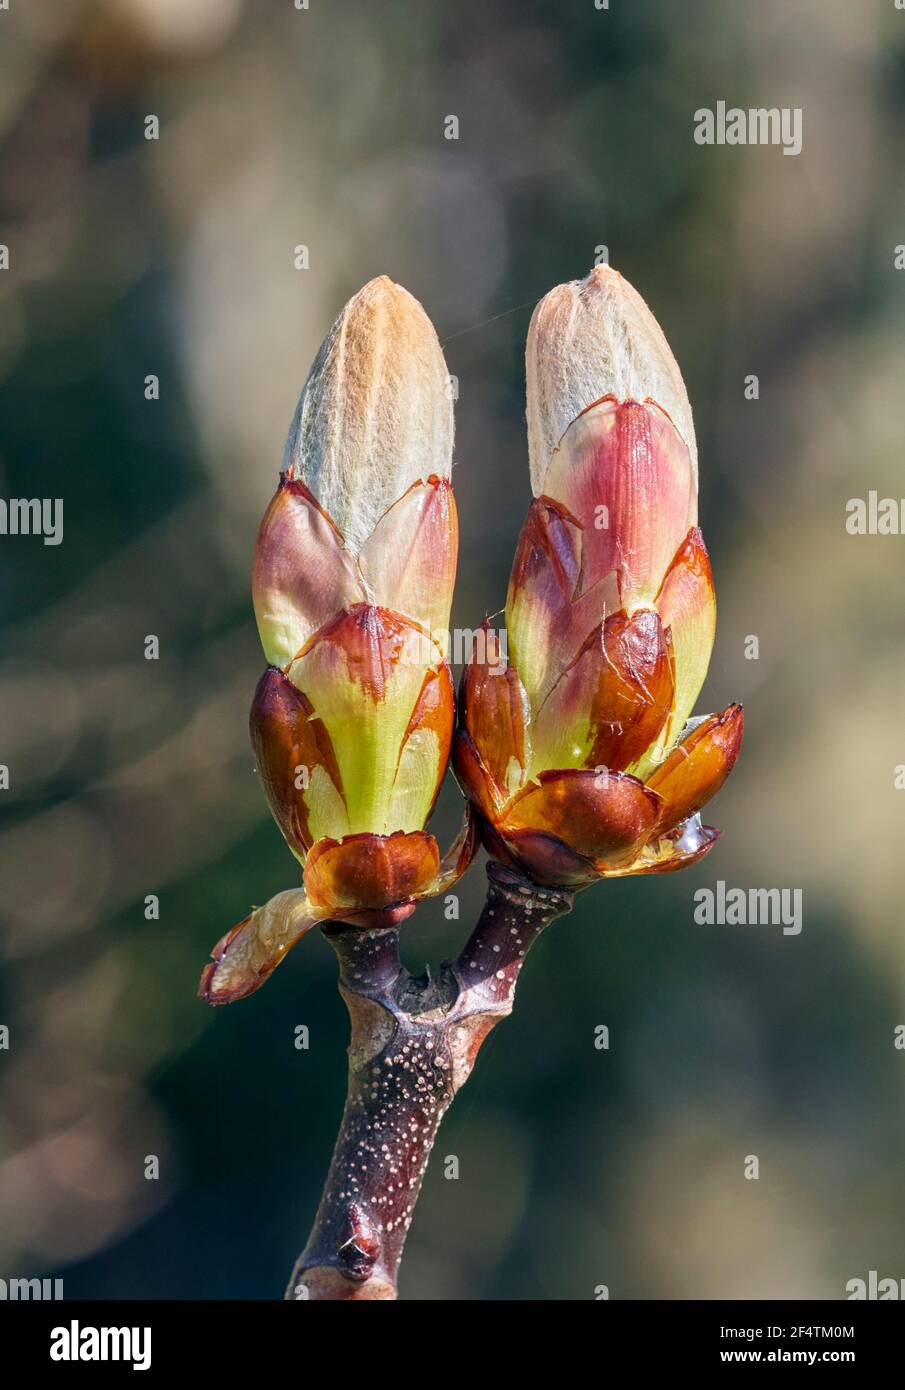 Horse Chestnut buds in spring. Hurst Meadows, East Molesey, Surrey. Stock Photo